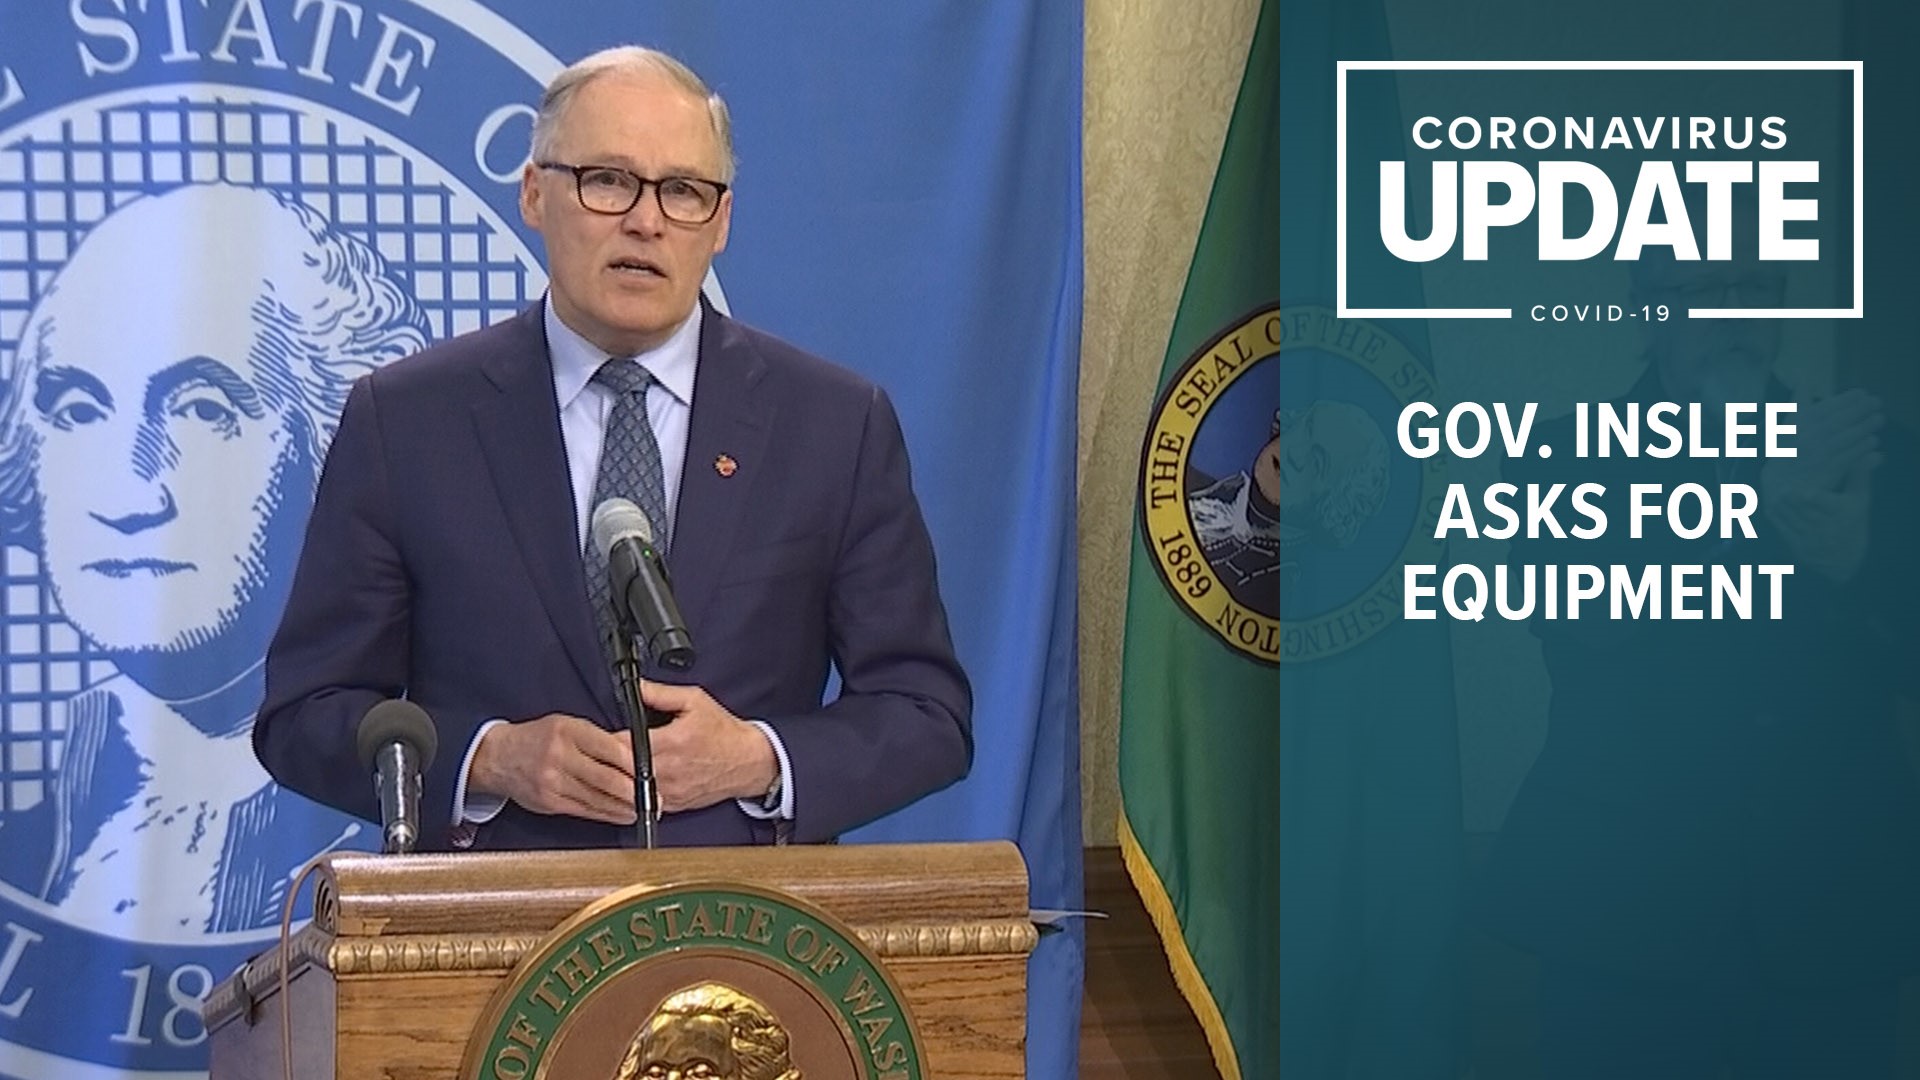 WA governor Jay Inslee is putting a call out for citizens and businesses to help with medical supply shortage.